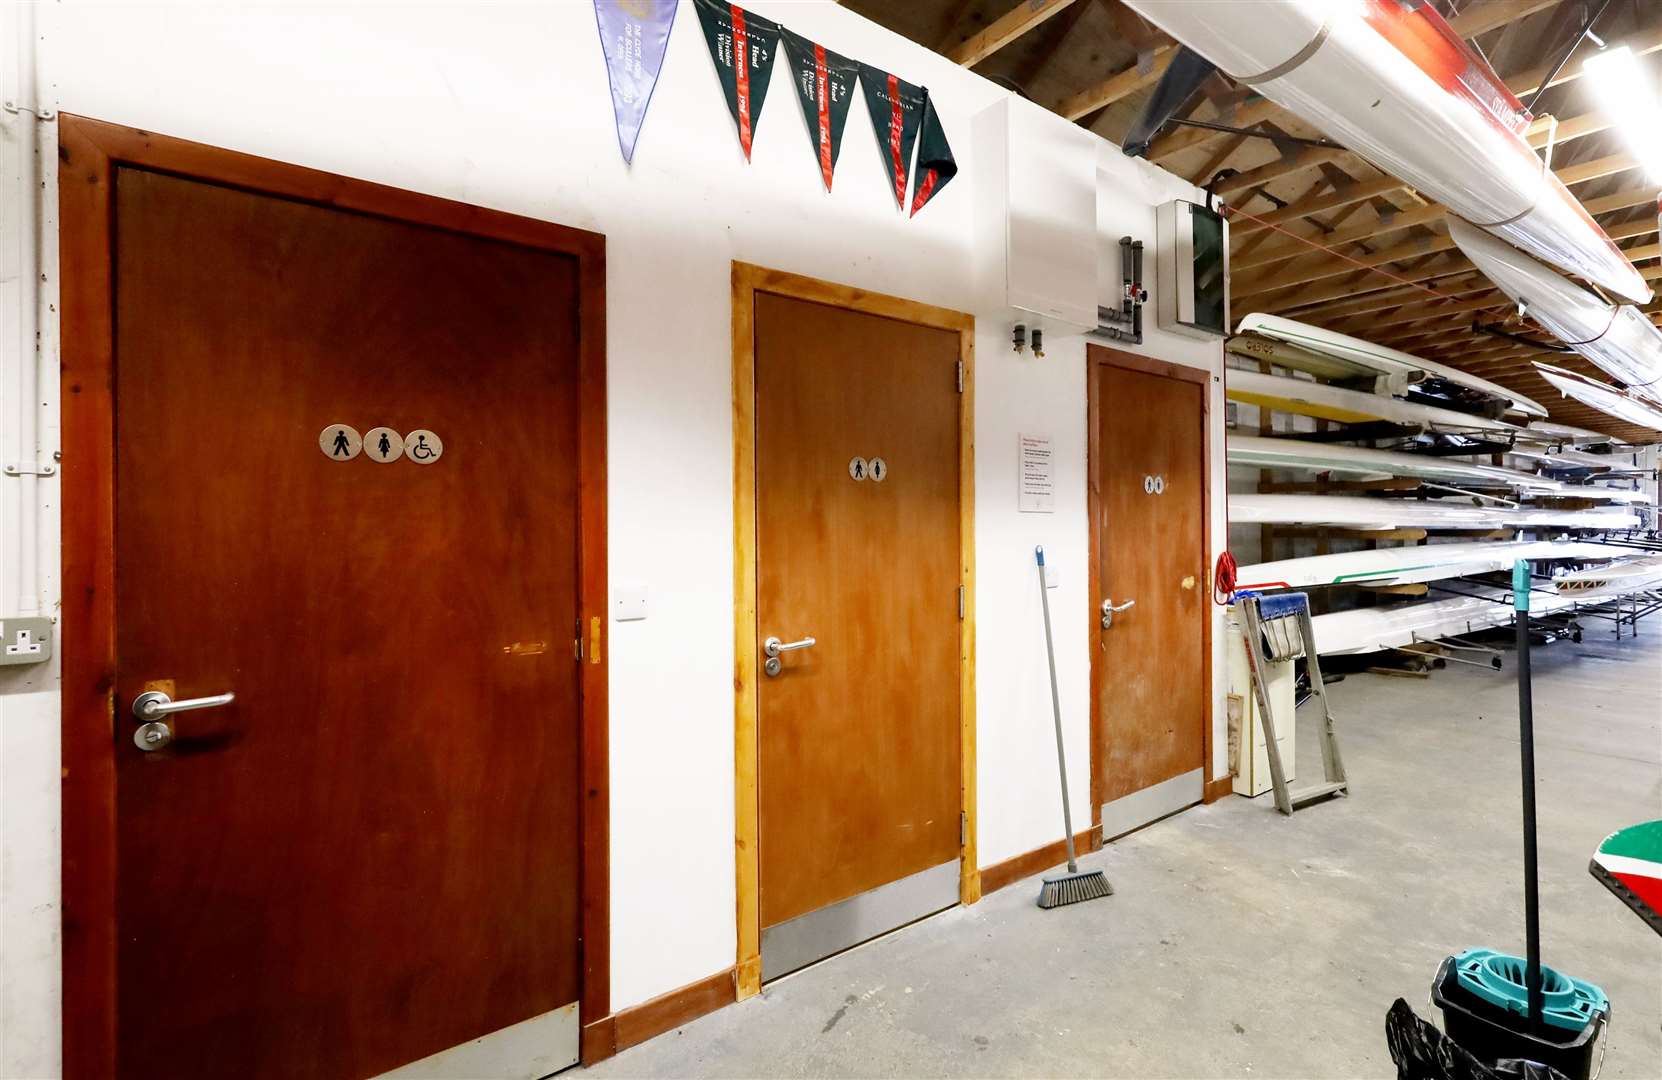 Toilet facilites in the boat house. Picture: James Mackenzie